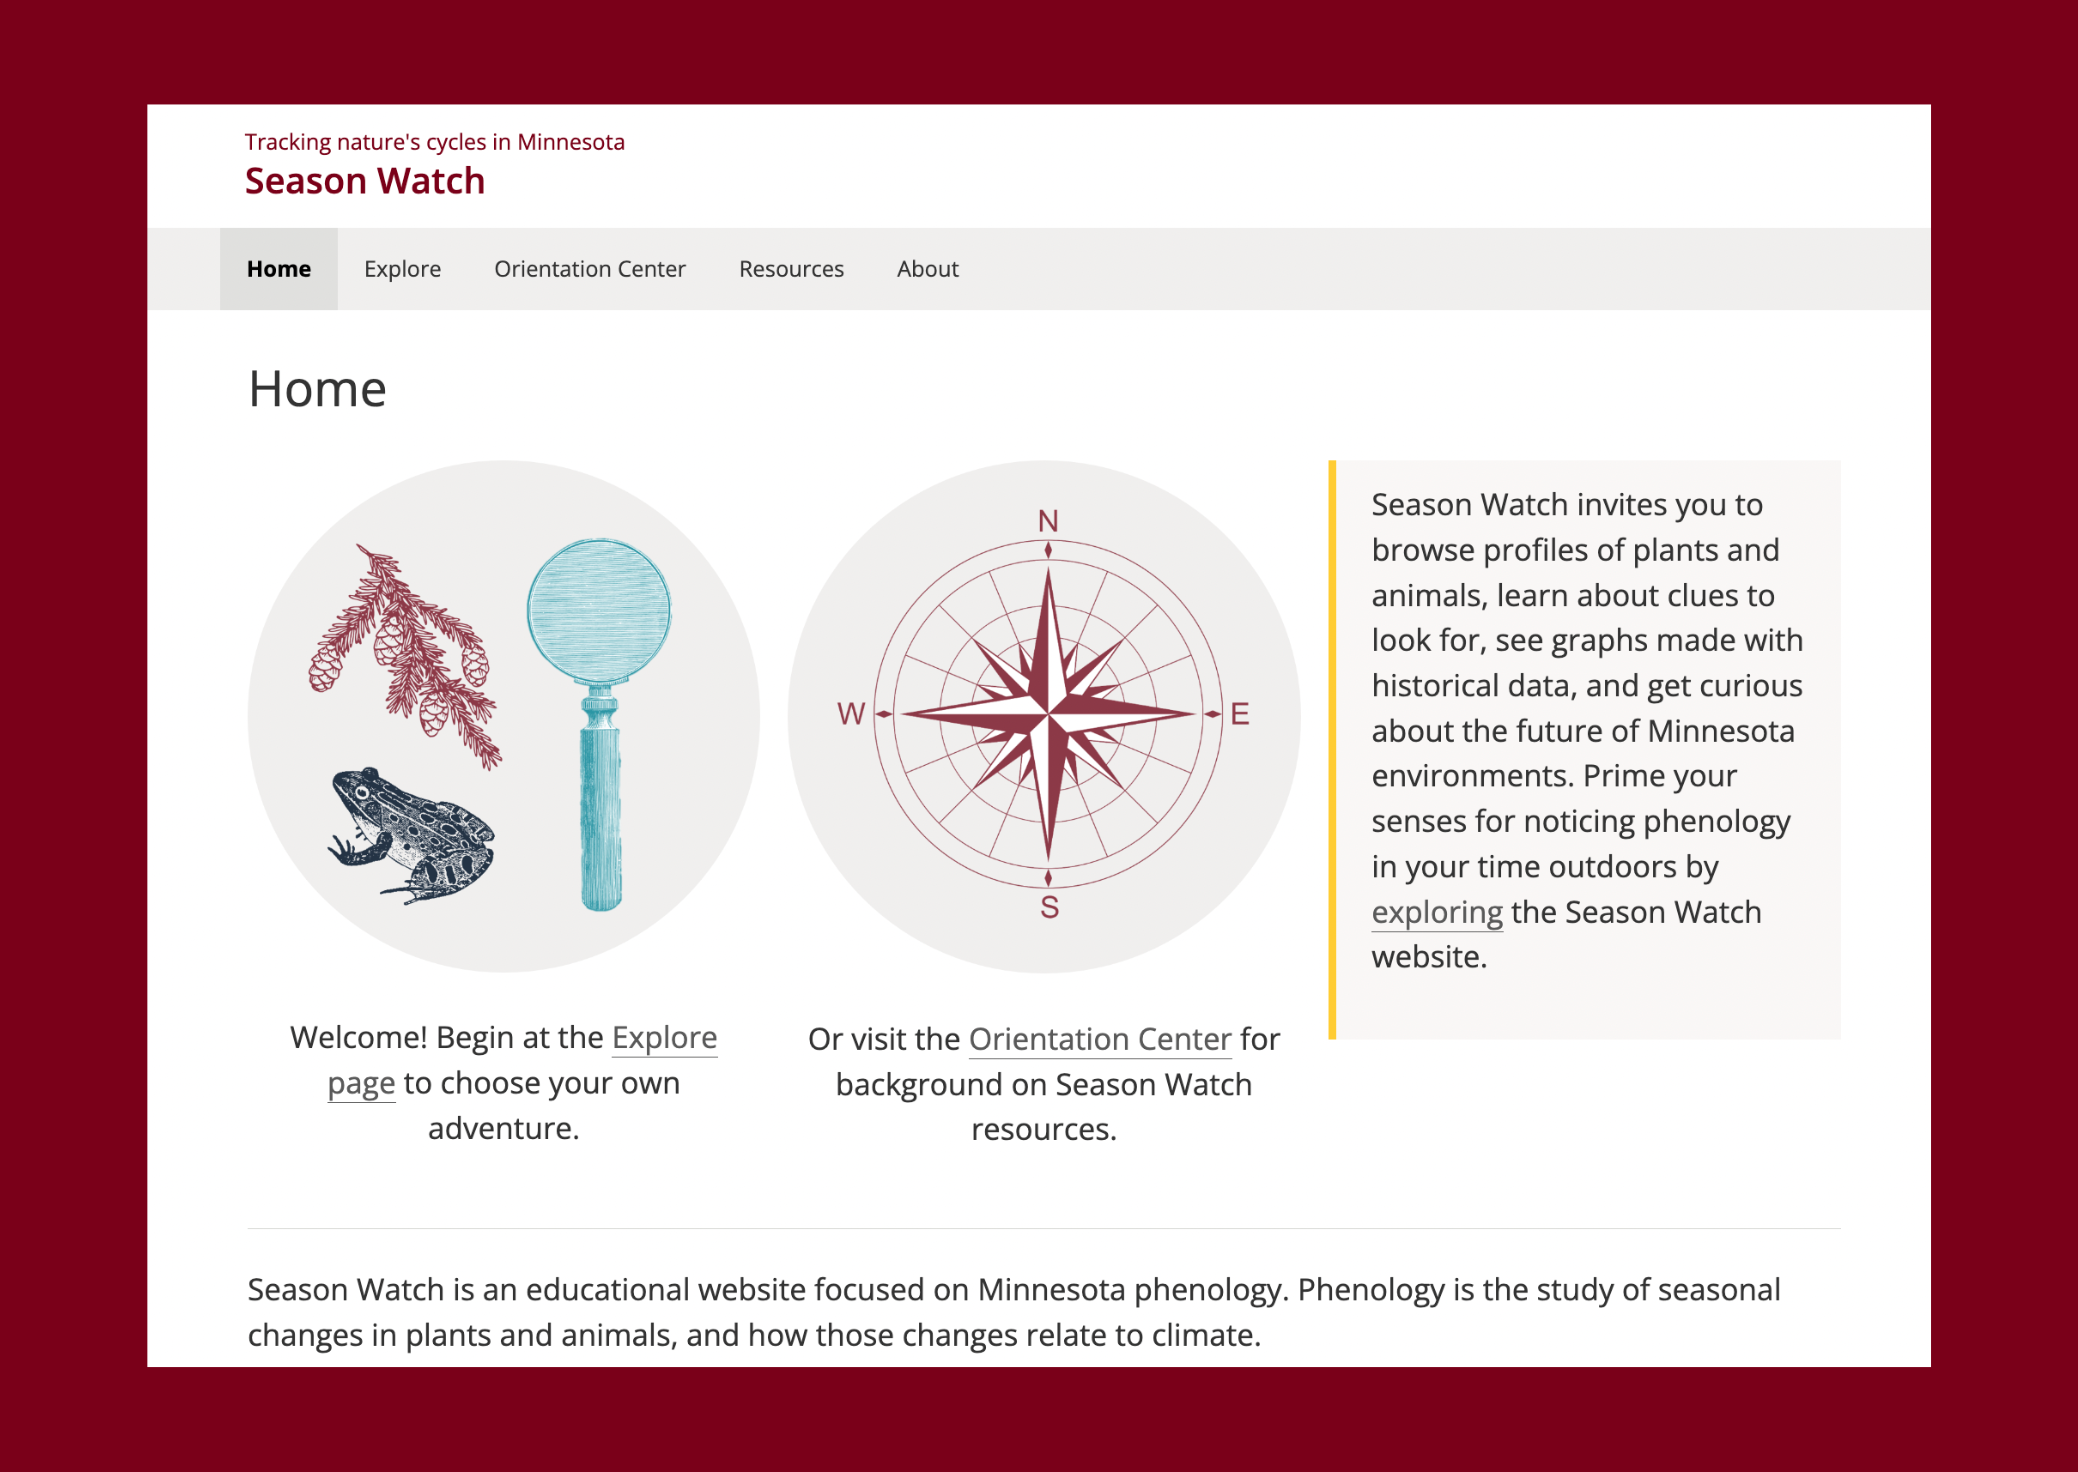 The home page for the Season Watch website (https://seasonwatch.umn.edu/). Below the menu are two large circles next to a block of text describing the Season Watch project. The left circle has hand-drawn images of a frog, a magnifying glass, and a fir branch. Below it is the text, "Welcome! Begin at the Explore page to choose your own adventure." The right circle has an image of a compass. Below it is the text, "Or visit the Orientation Center for background on Season Watch resources."